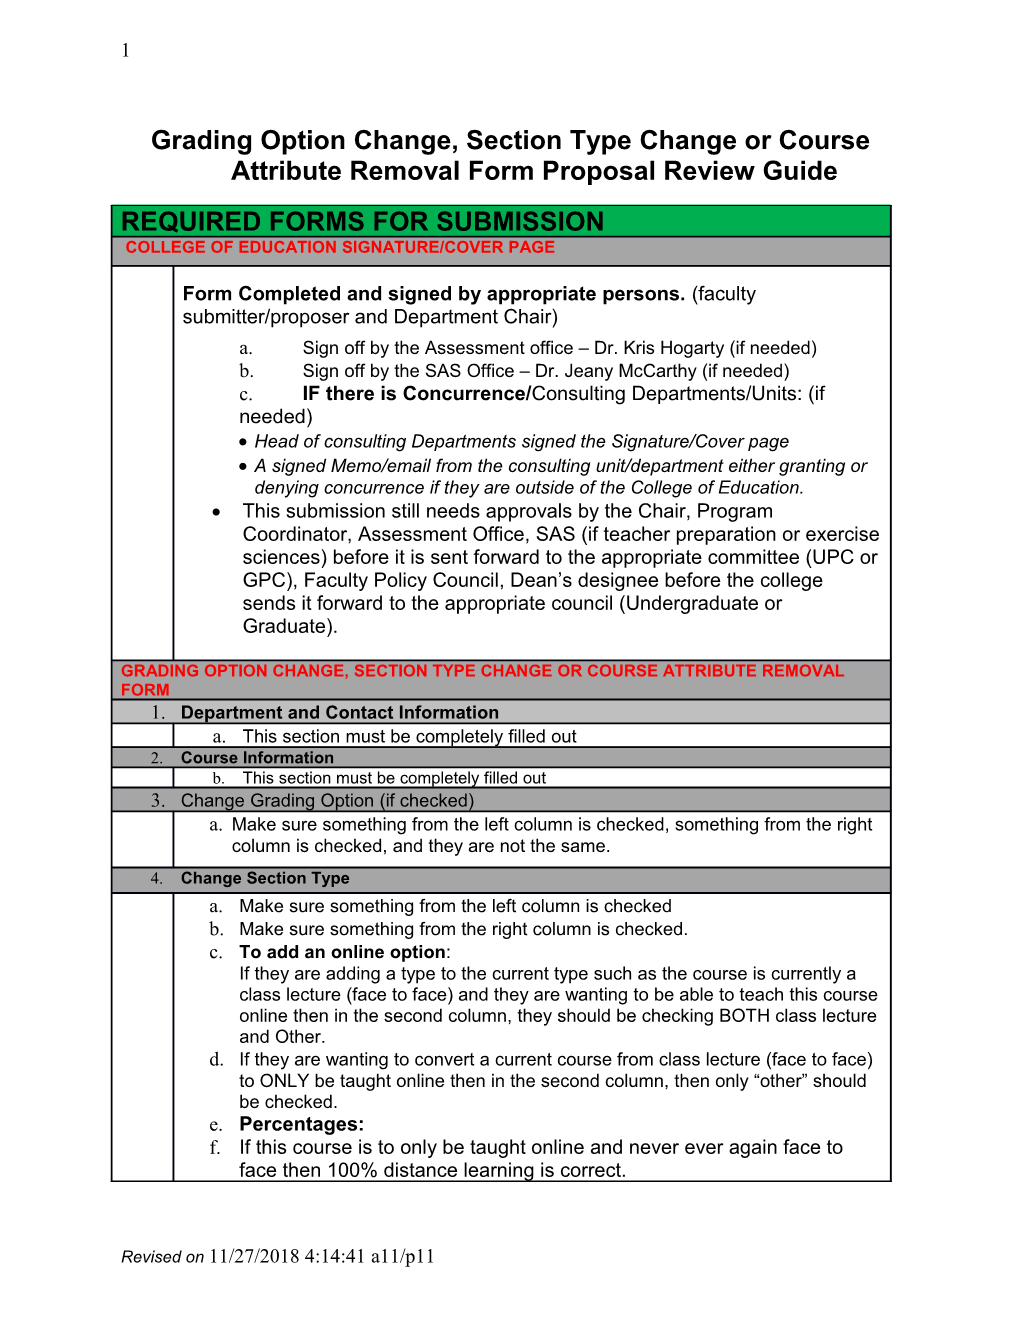 Grading Option Change, Section Type Change Or Course Attribute Removal Form Proposal Review